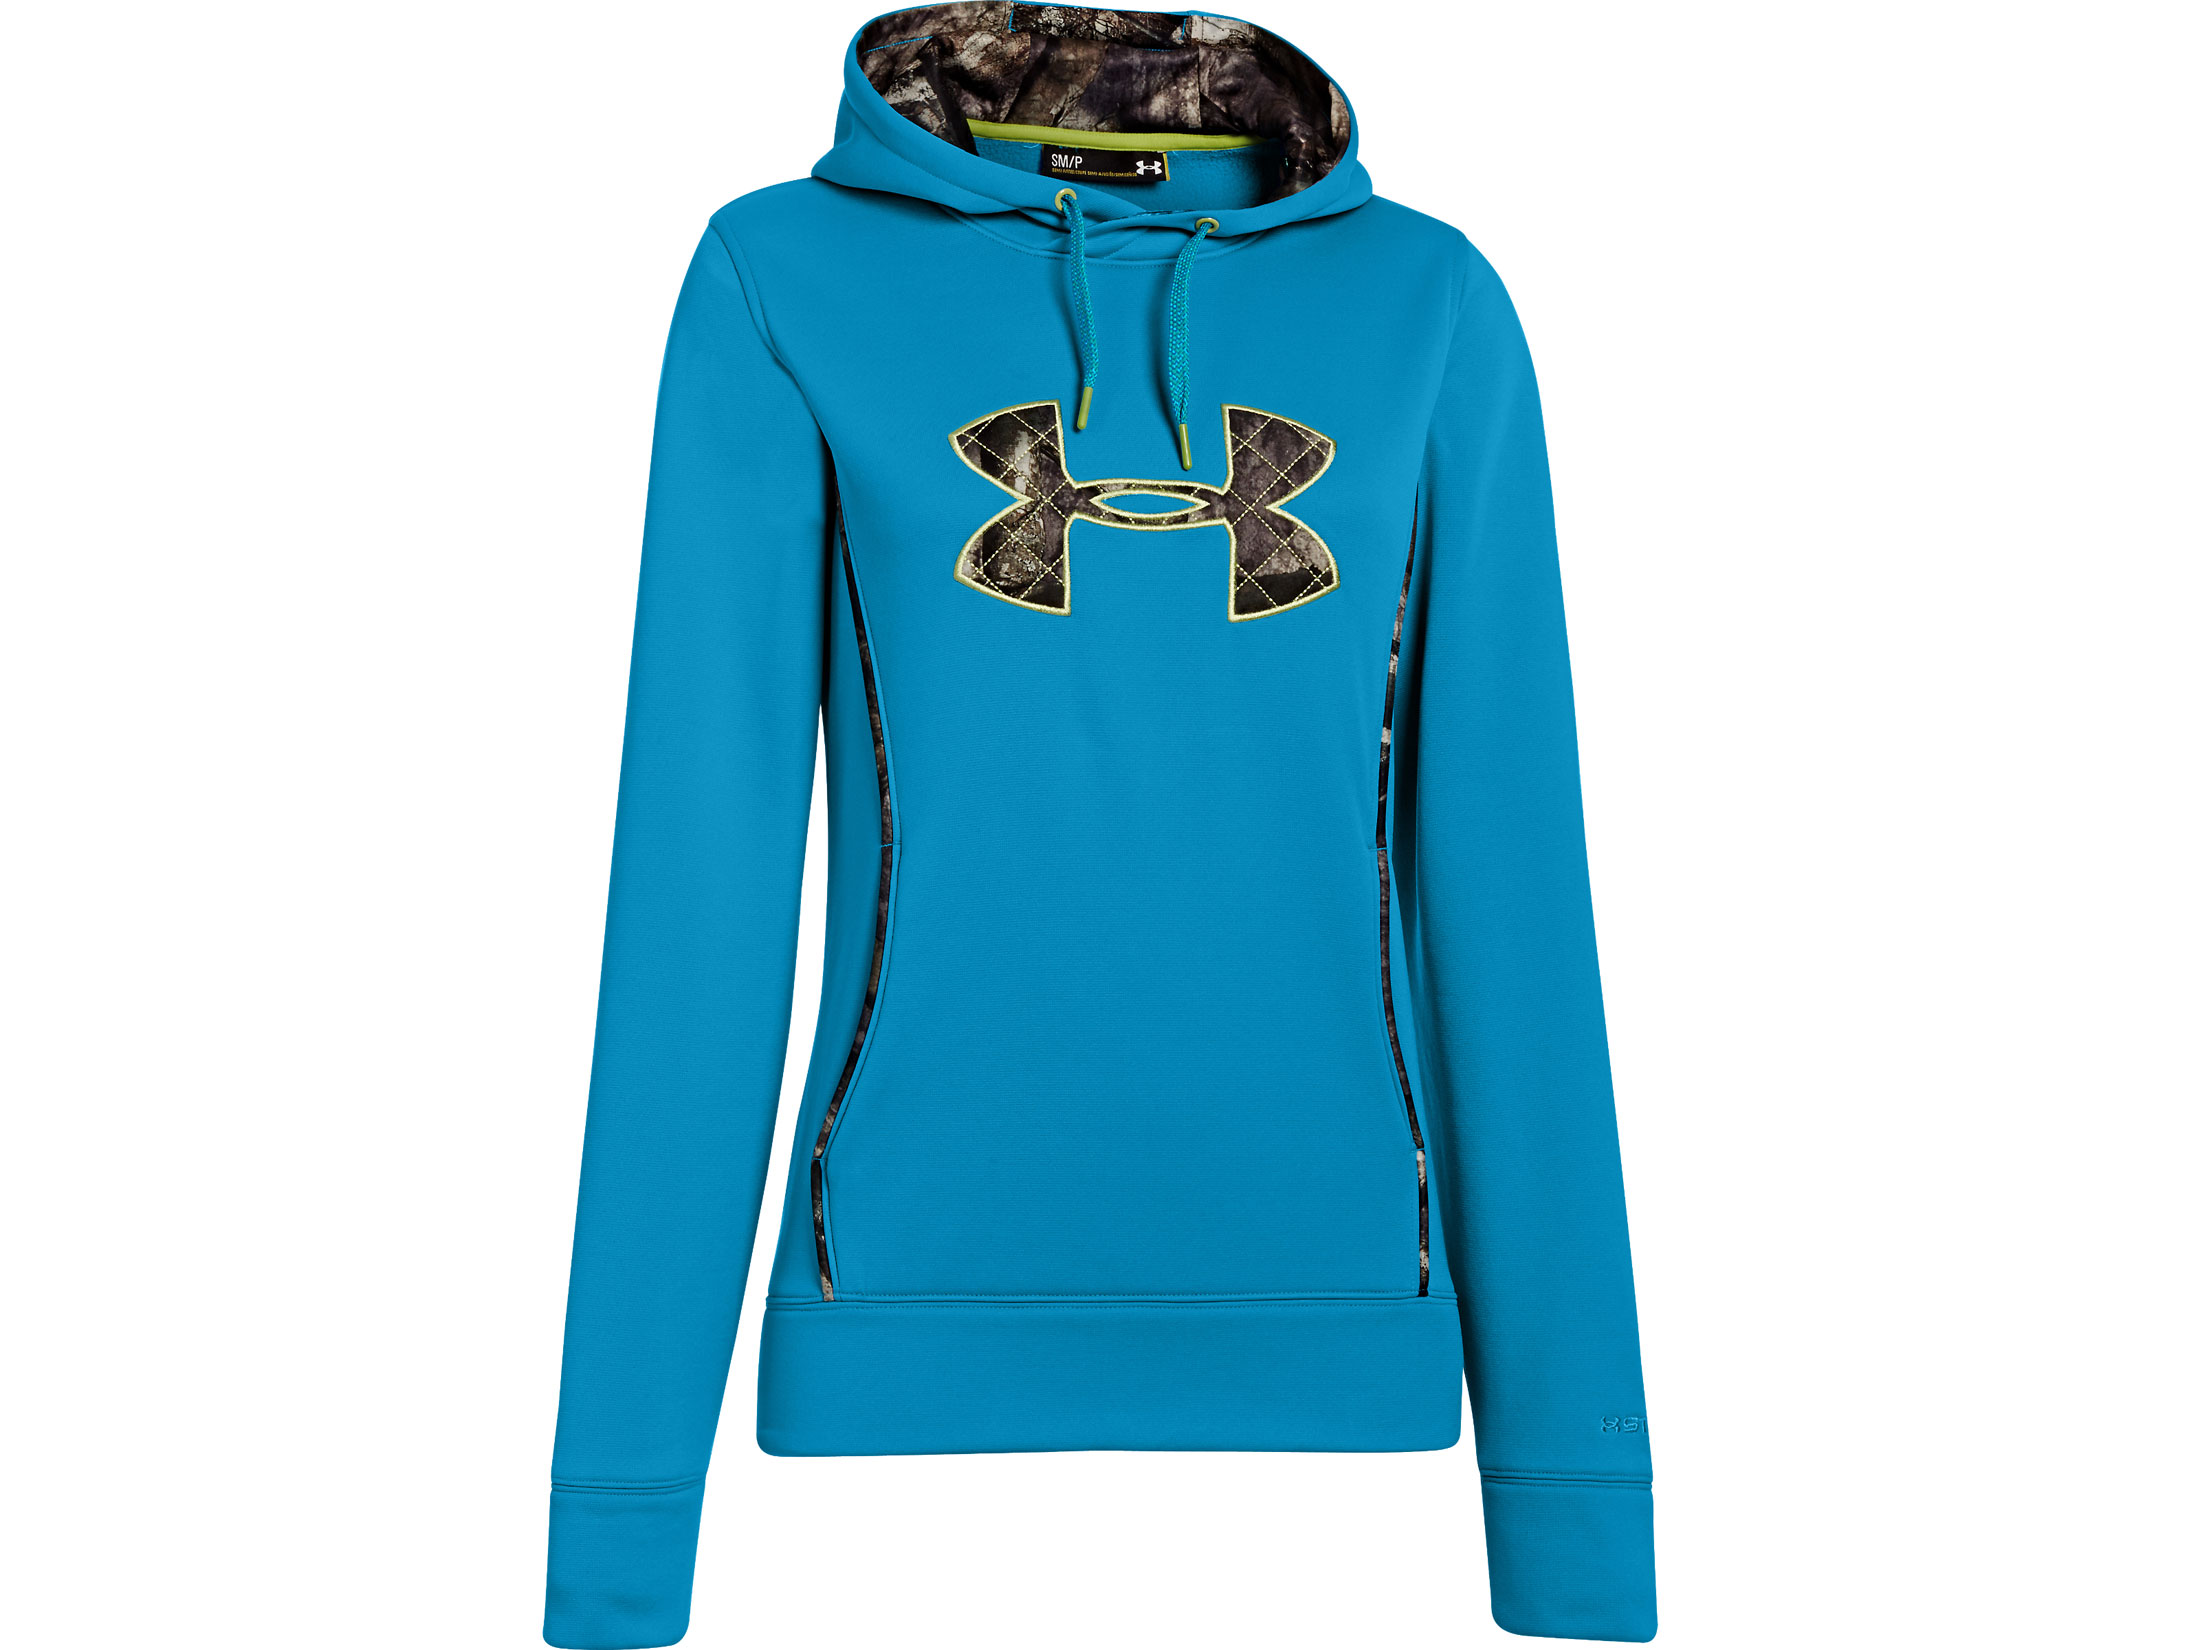 Under Armour Women's Storm Cal Hooded Sweatshirt Polyester Rifle Green